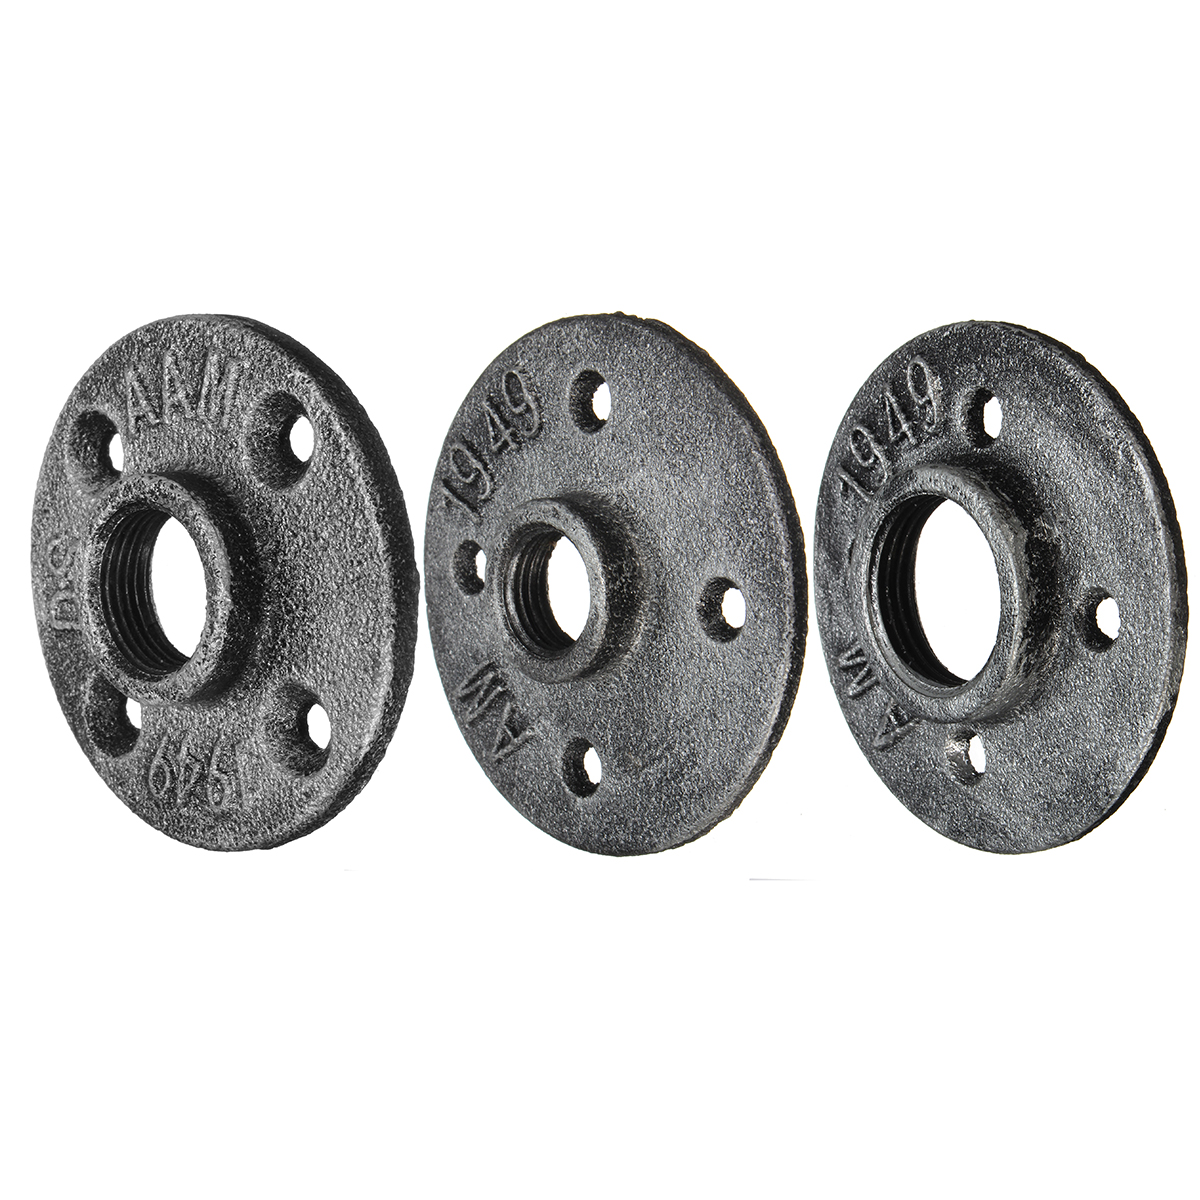 12-34-1-Inch-BSP-Flange-Malleable-Iron-Pipes-Fittings-Wall-Mount-Floor-Flange-Rusty-Flange-1325053